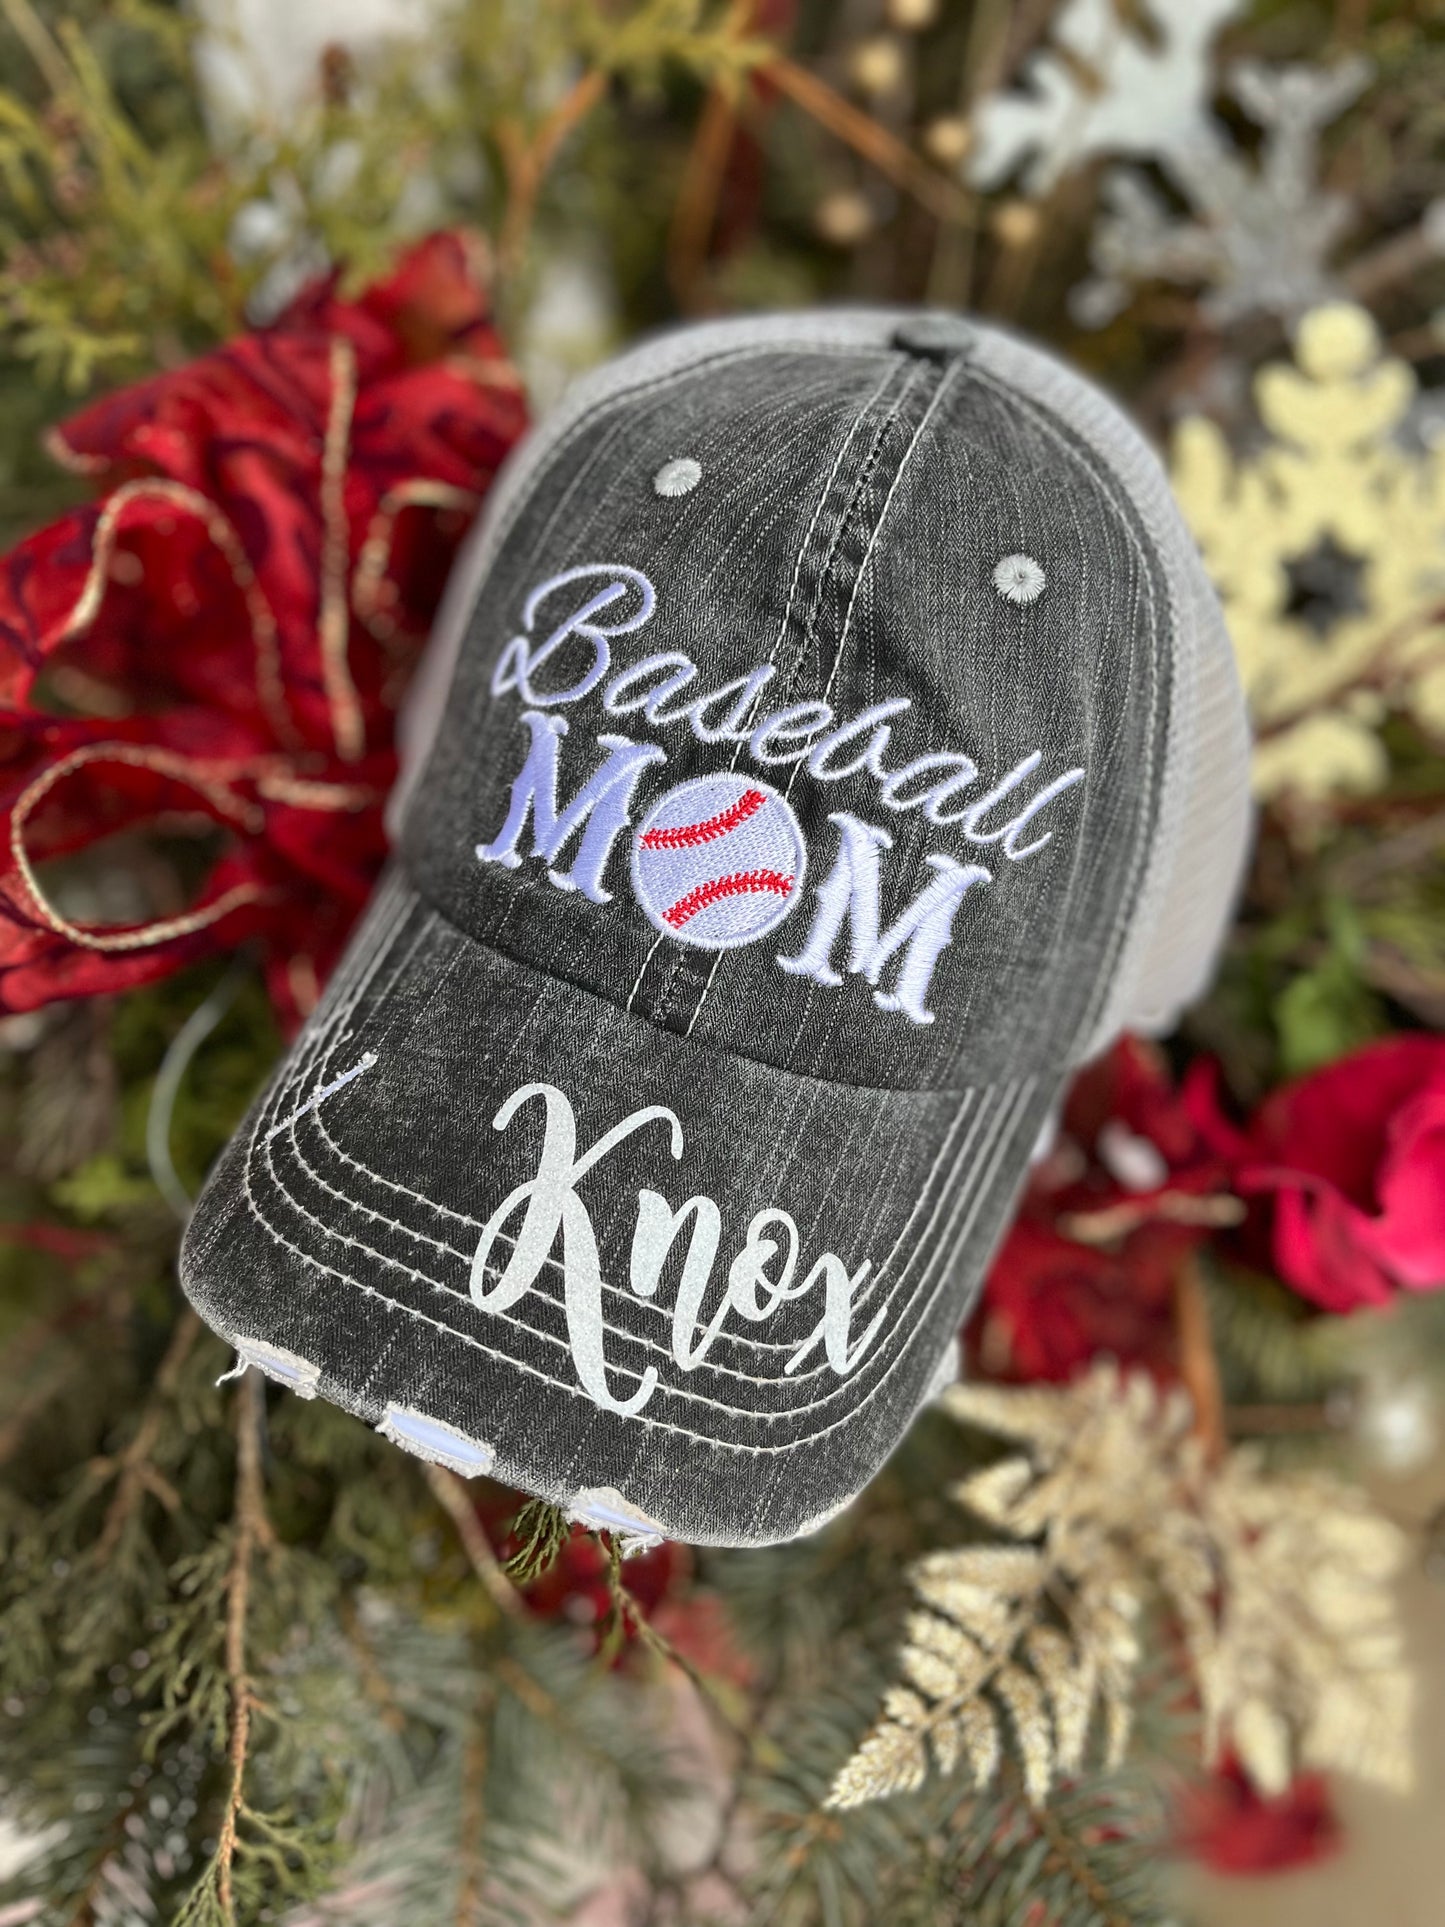 Gymnastics hats Gymnastics mom Womens trucker baseball style hat Customize names numbers BLING - Stacy's Pink Martini Boutique